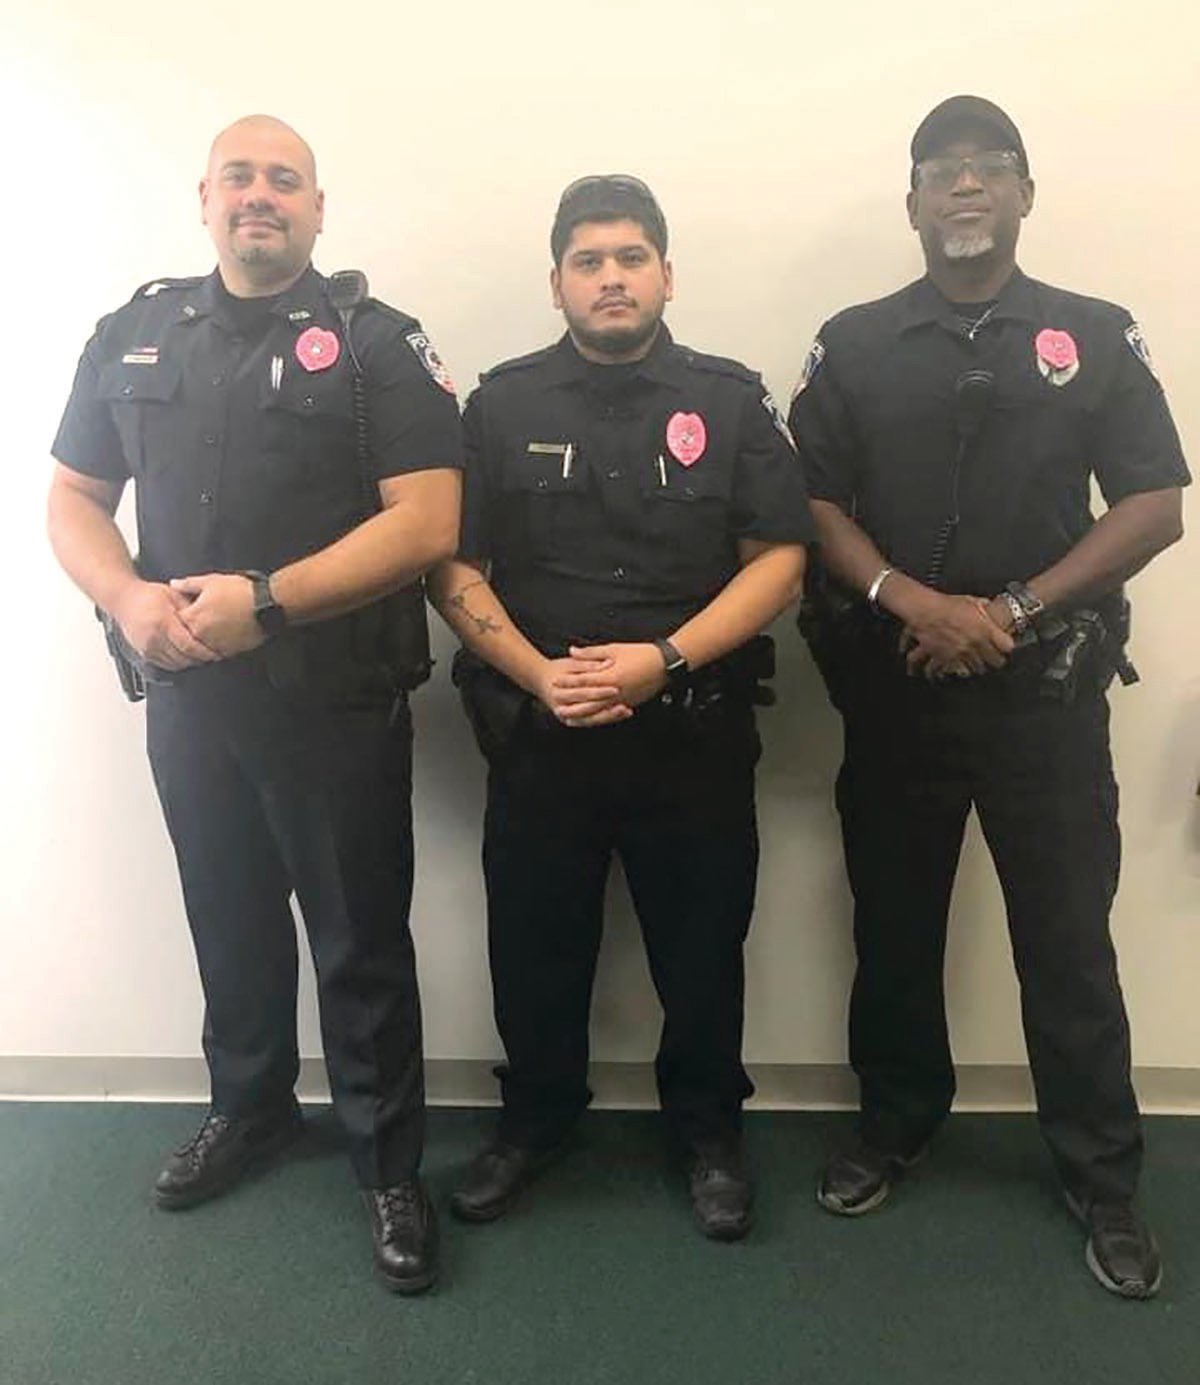 CPD officers will be wearing pink badges all through the month of October.